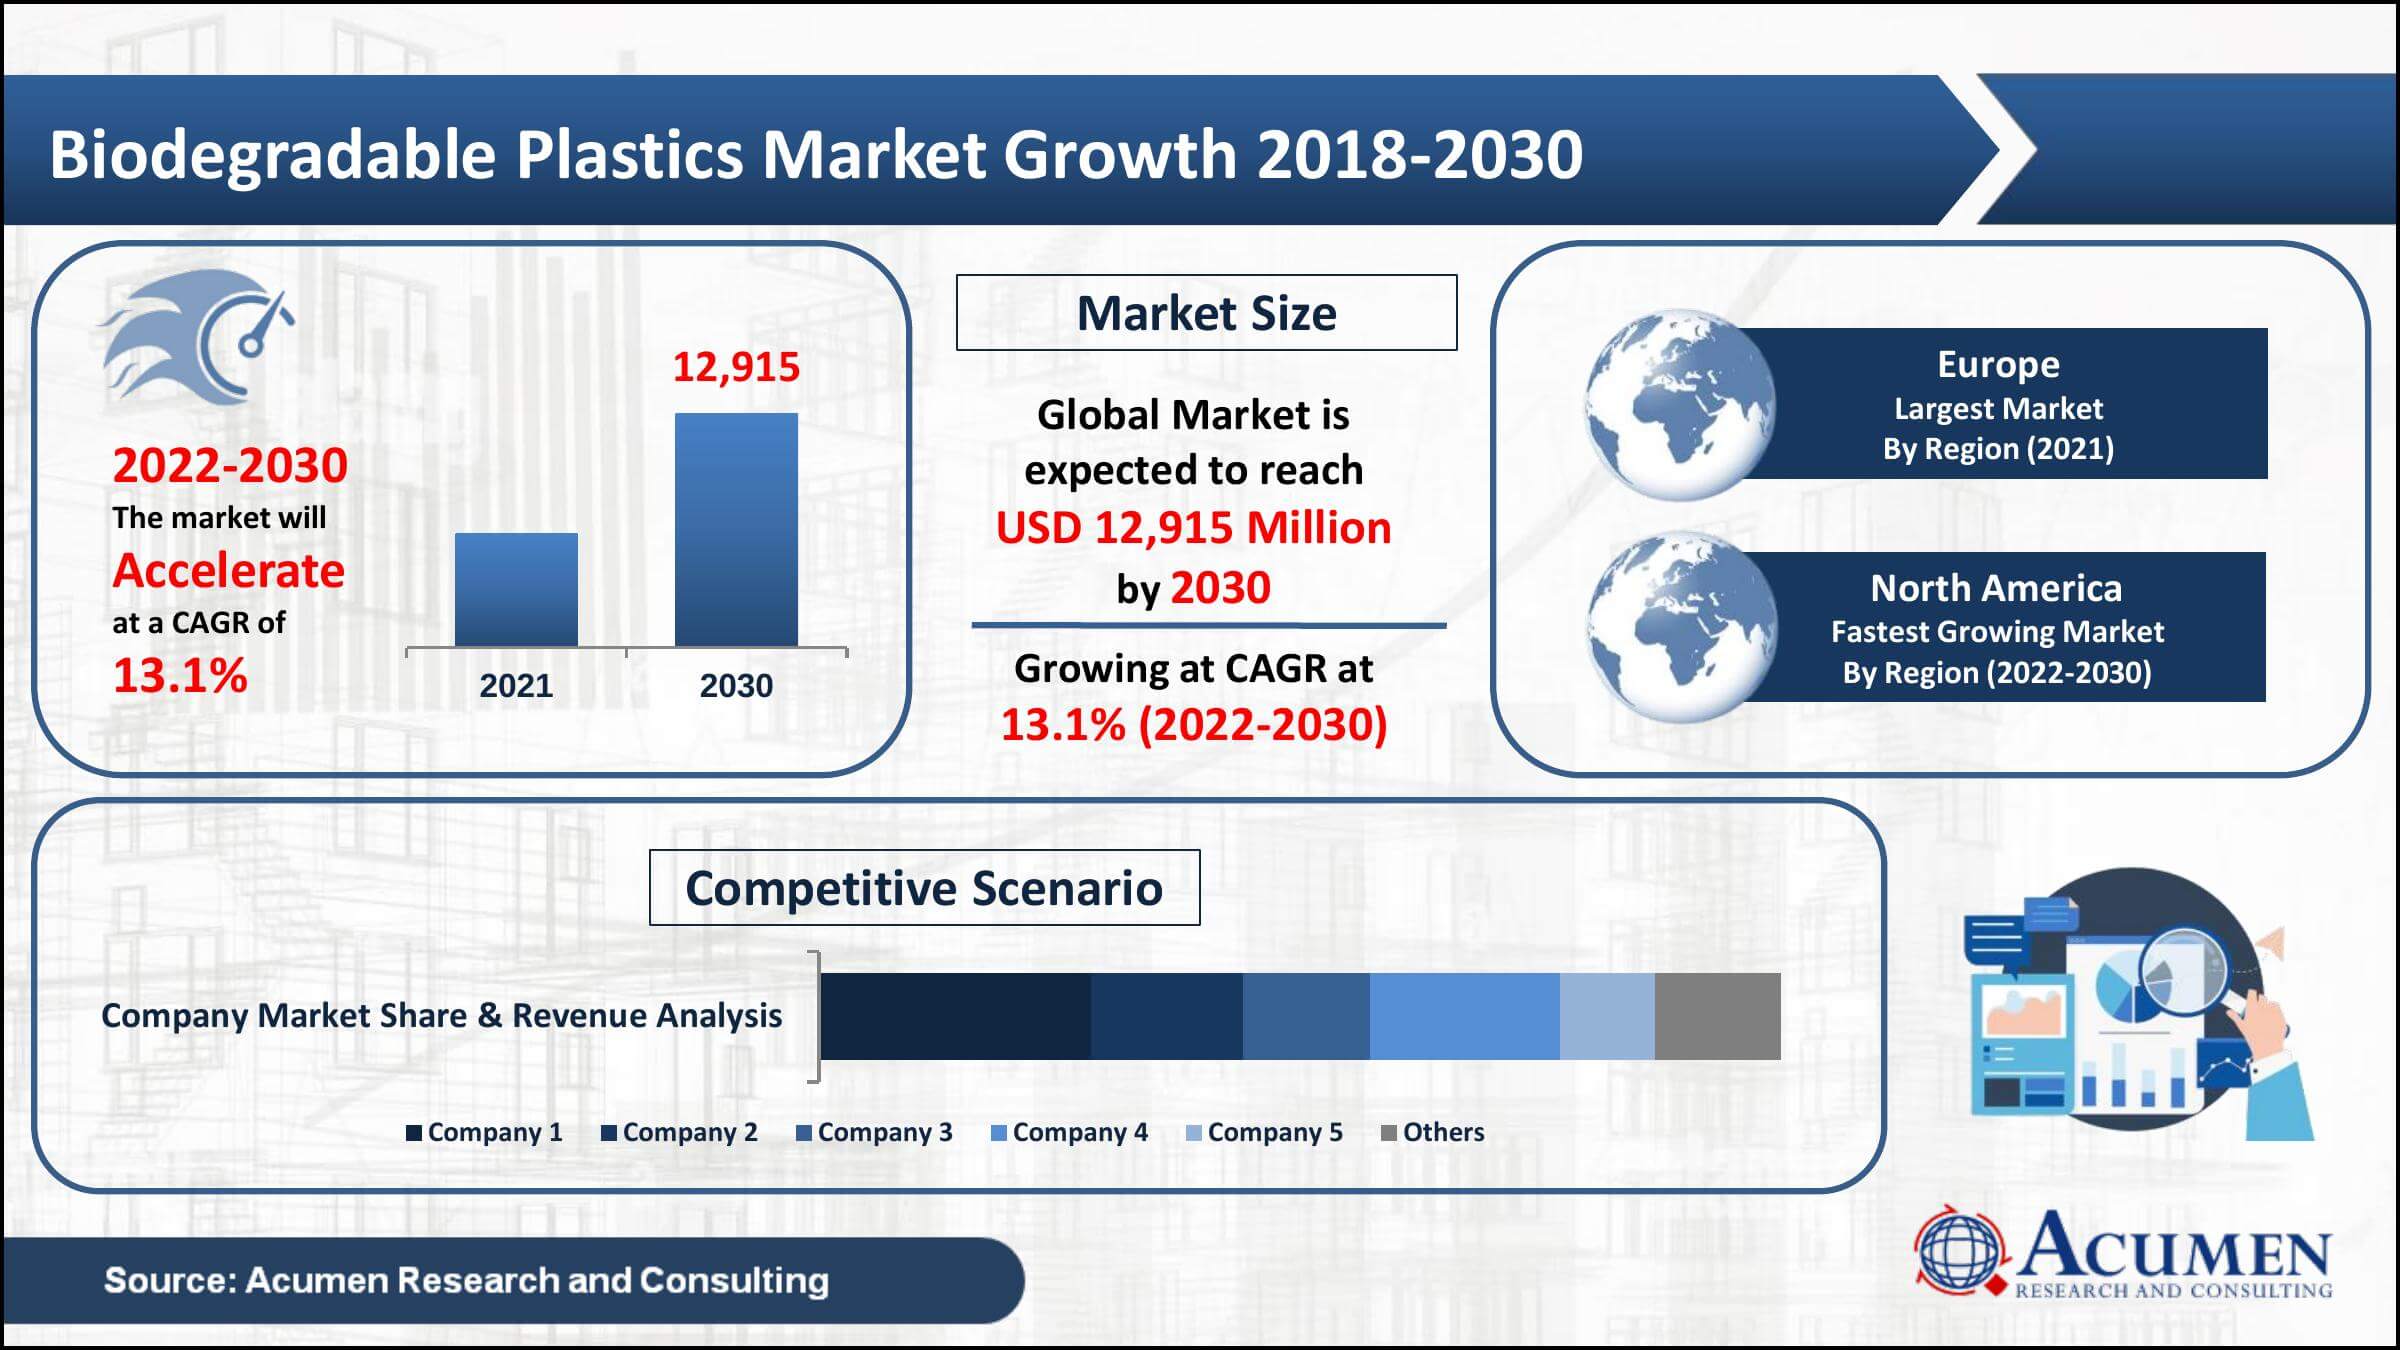 Global biodegradable plastics market revenue collected USD 4,345 Million in 2021, with a 13.1% CAGR between 2022 and 2030